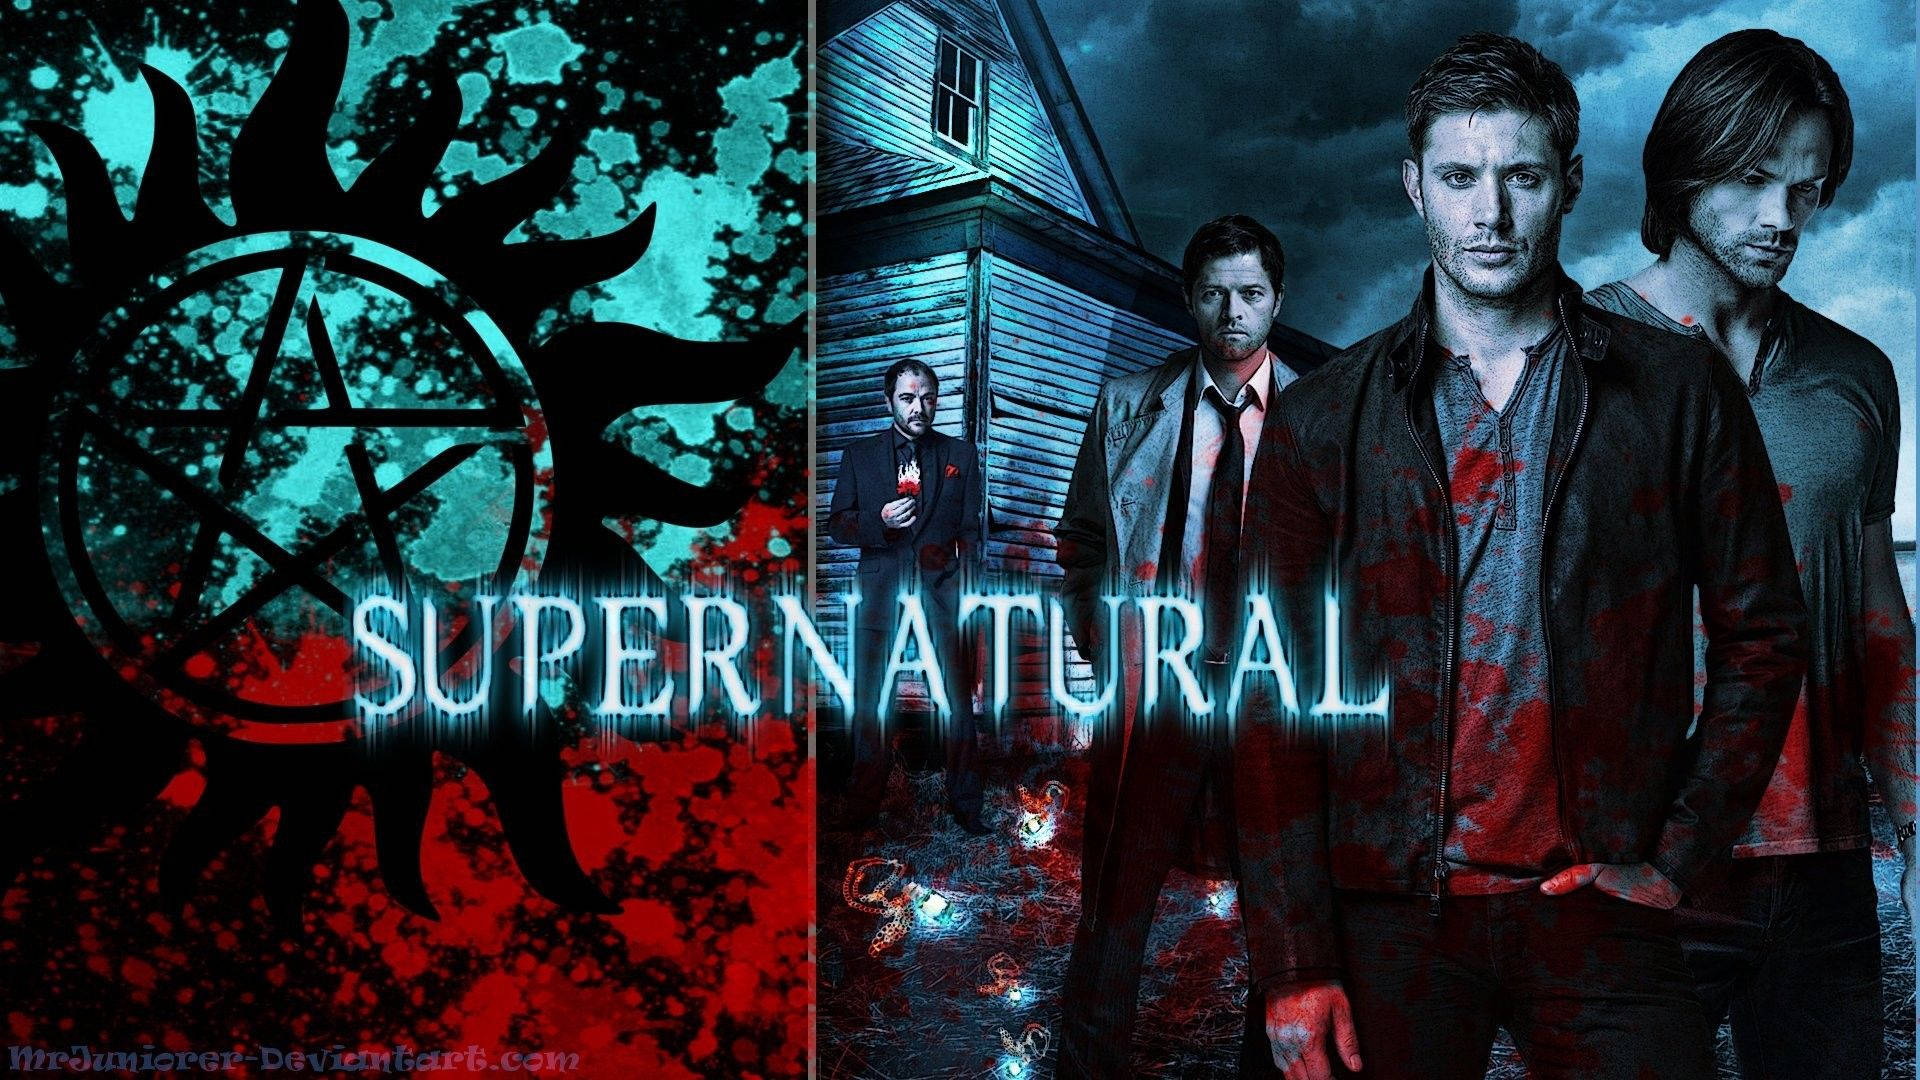 From Beyond - Supernatural characters with pentagram symbol Wallpaper